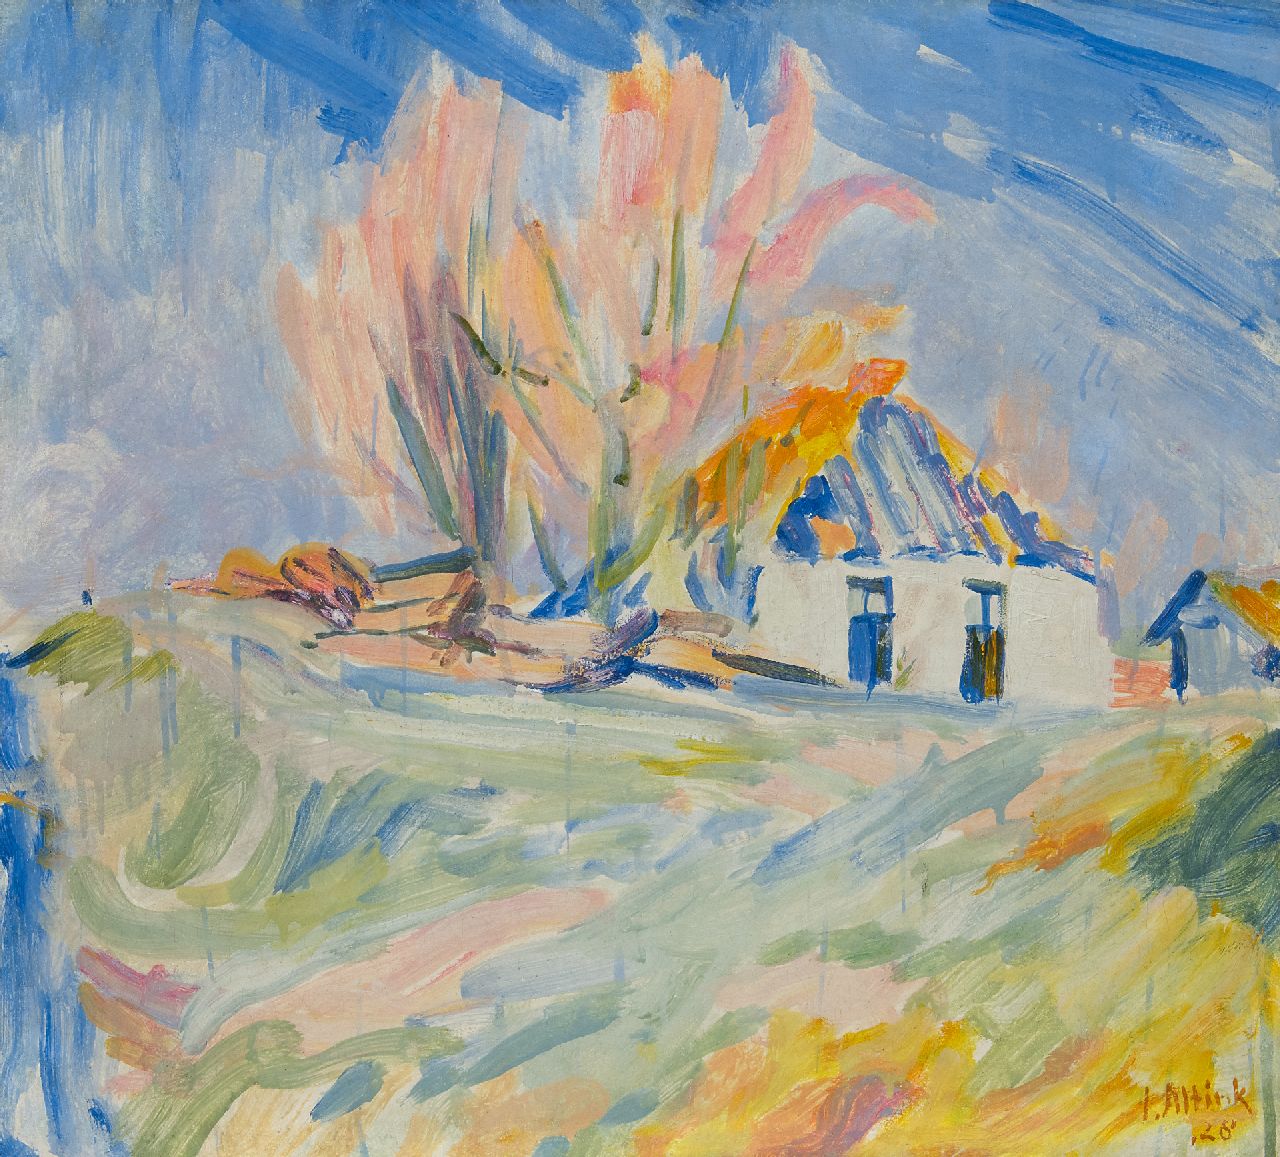 Altink J.  | Jan Altink | Paintings offered for sale | The farm 'Blauwborgje' in Groningen, oil on canvas 55.0 x 60.4 cm, signed l.r. and dated '28